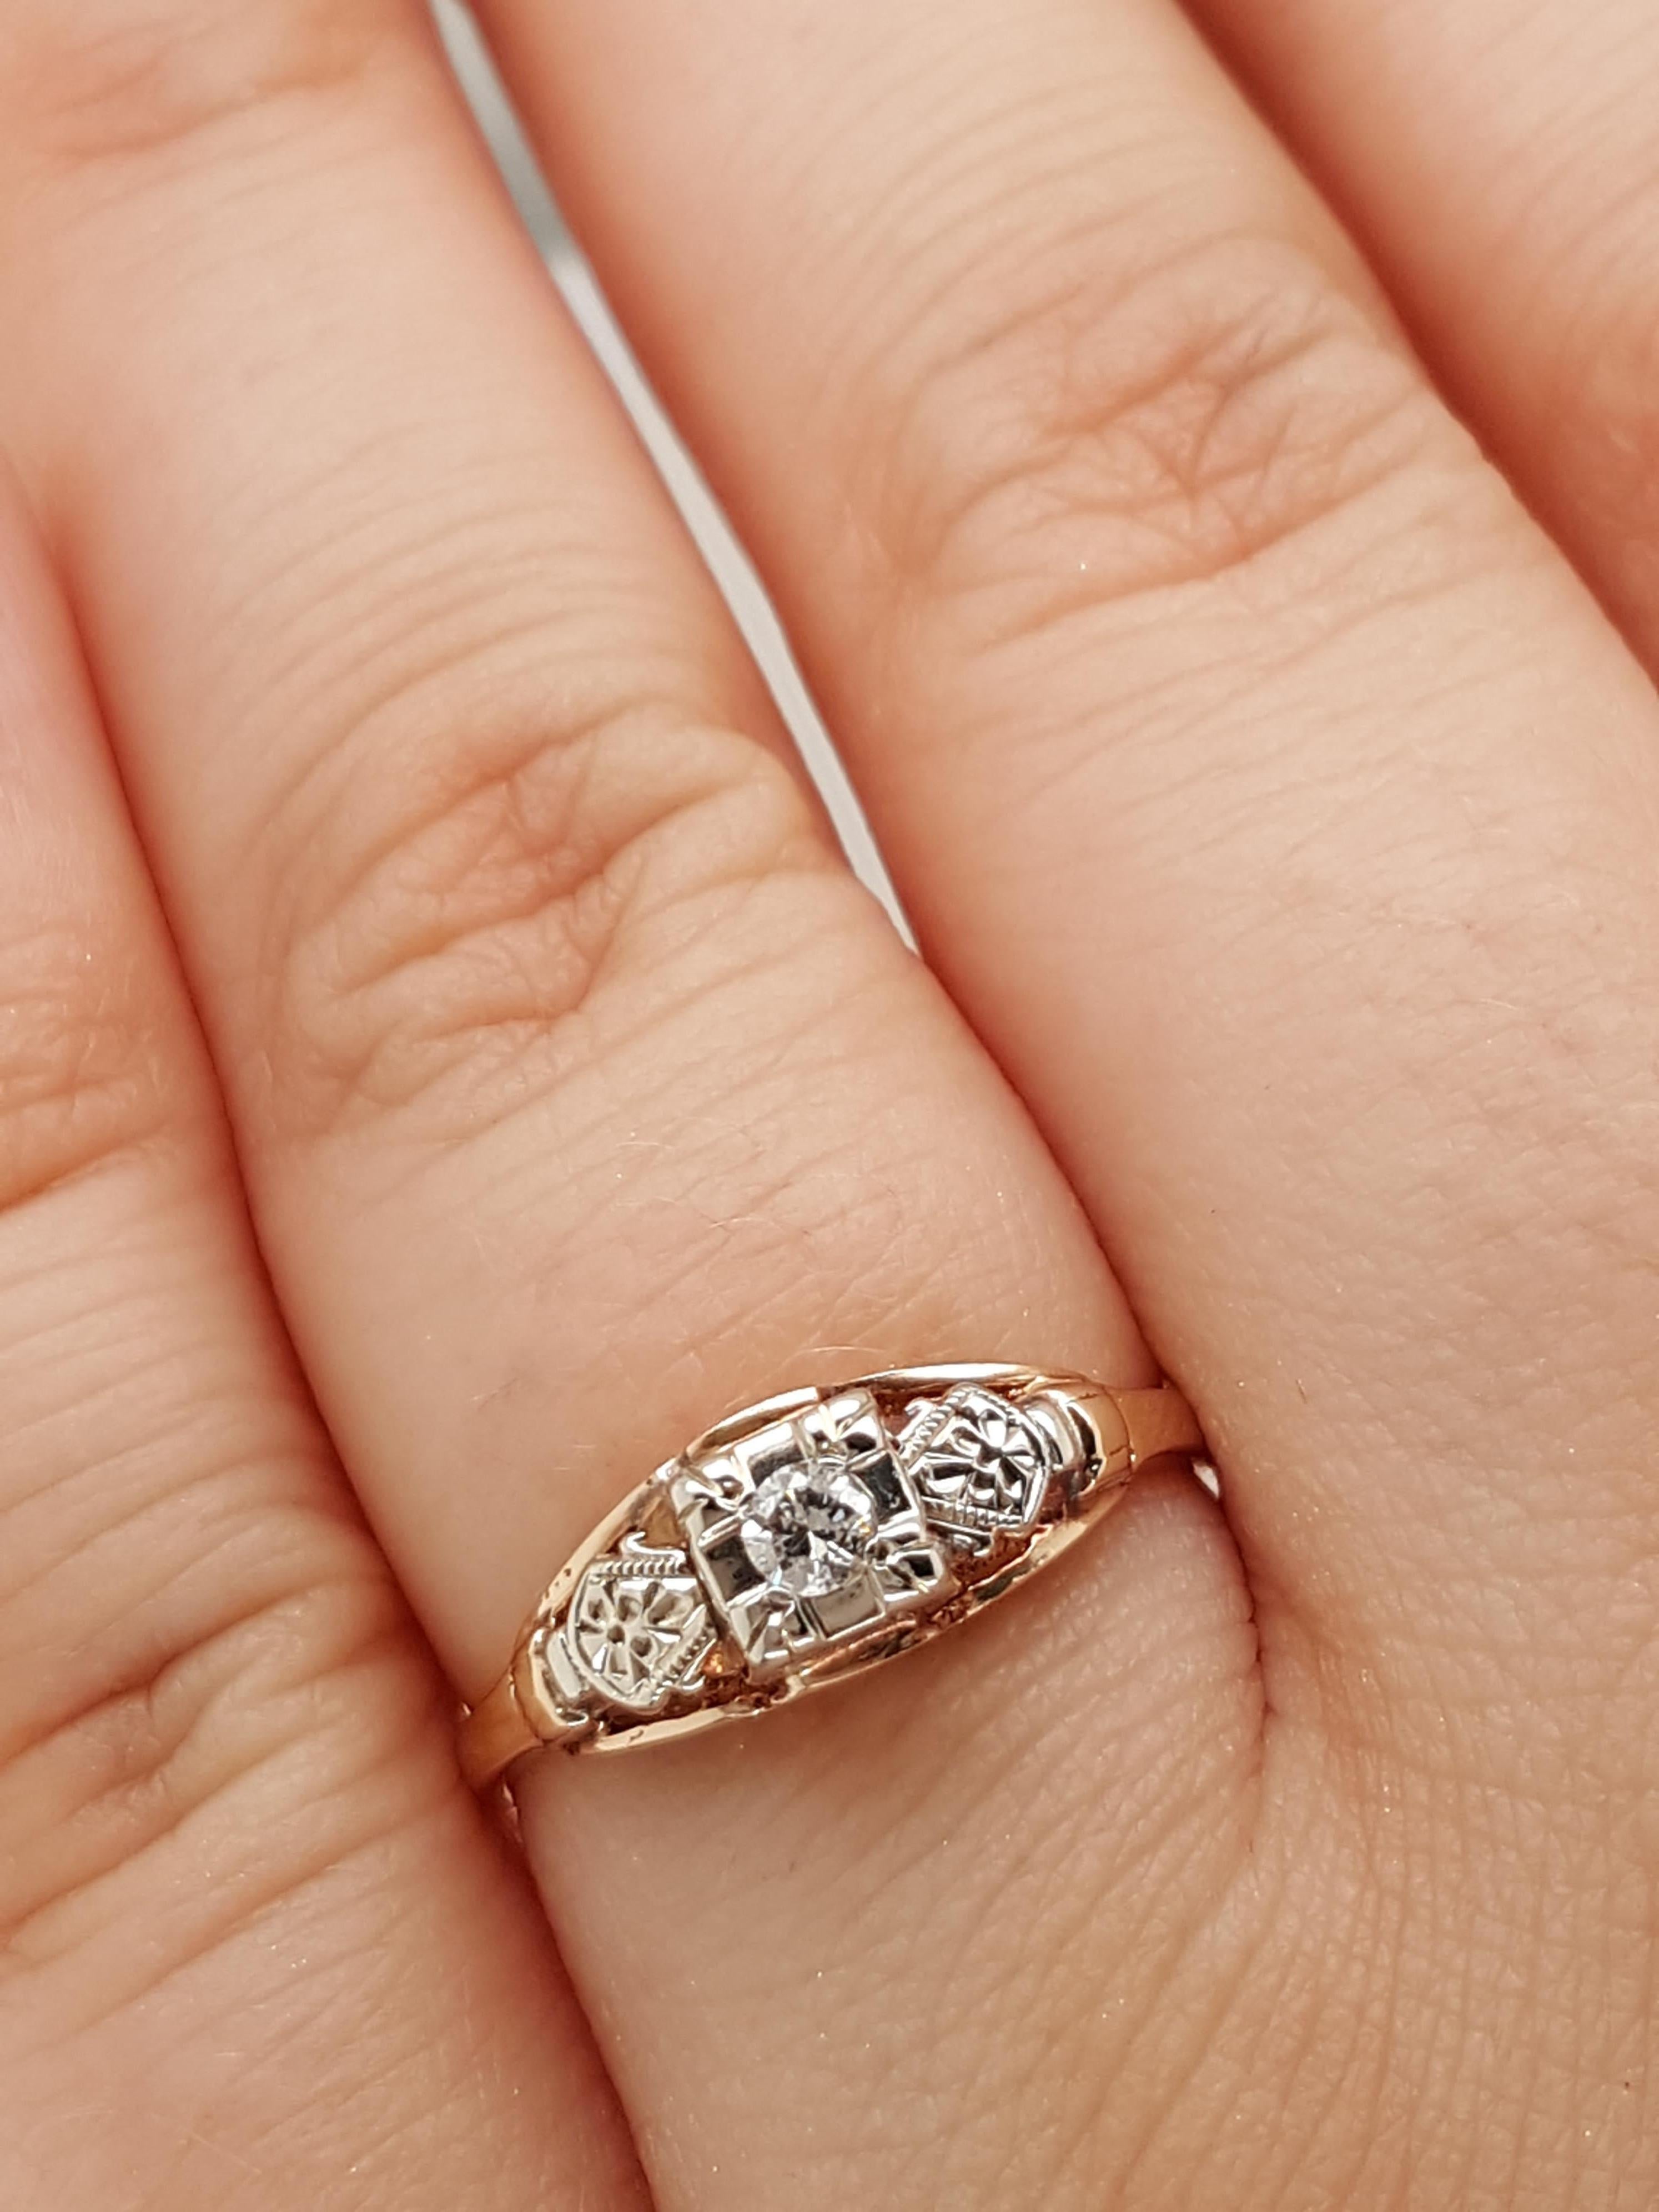 This Art Deco solitaire is a fine example of a filigree solitaire engagement ring crafted in 14 karat white 7 yellow gold. The 0.07 ct old European cut diamond is held high in four prongs showcasing the solitaire from all sides! Flowing down from